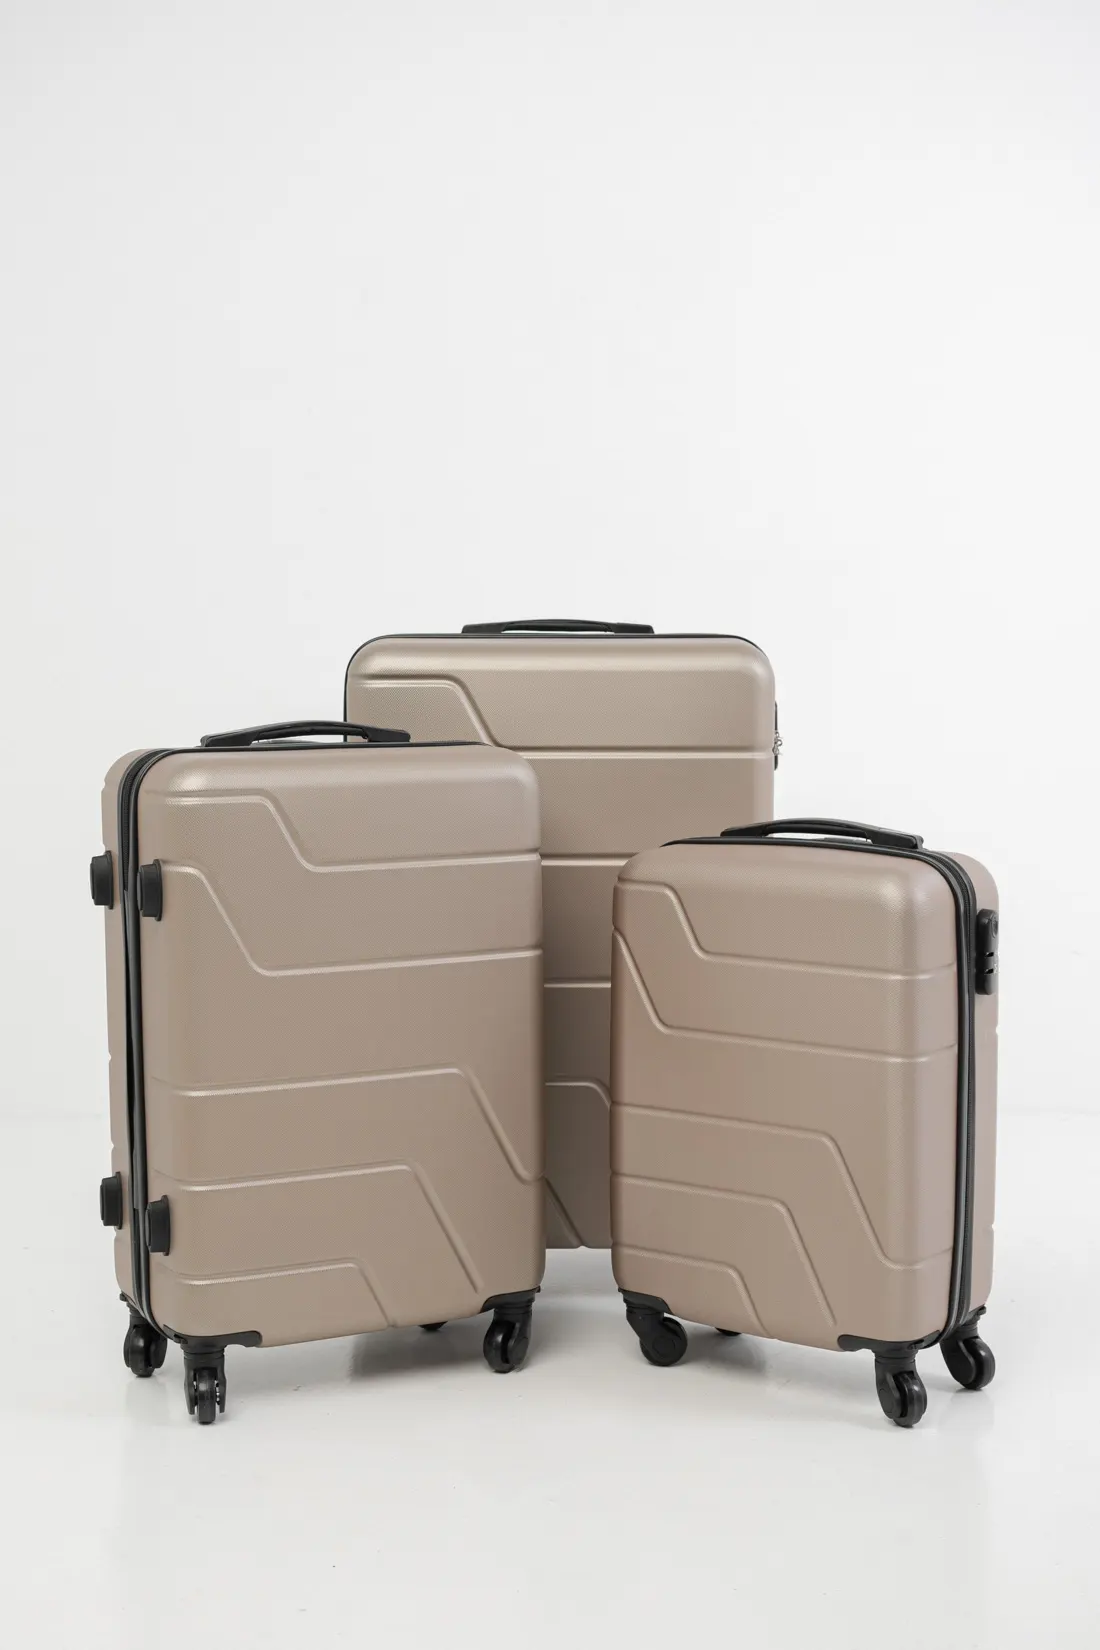 MSG SUITCASE 3 PIECES - CHAMPAGNE